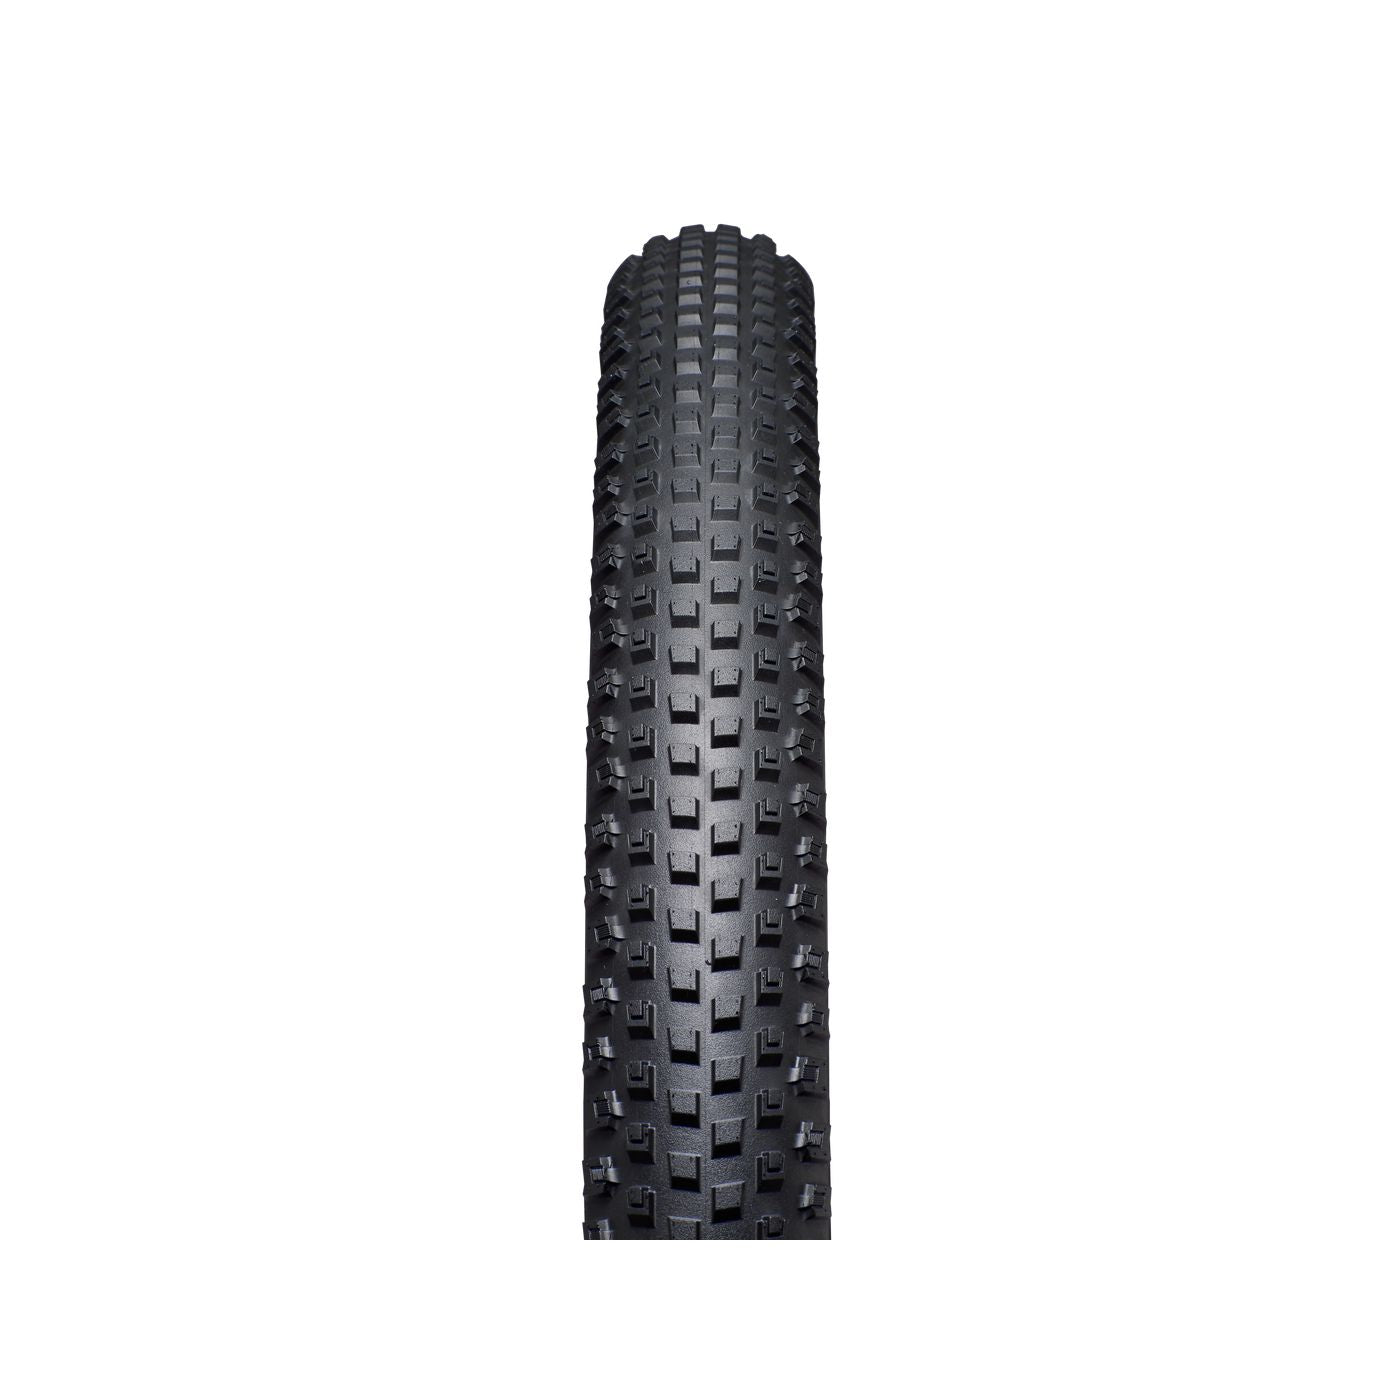 Specialized Renegade Grid 2Bliss Ready T5 29" Bike Tire - Tires - Bicycle Warehouse